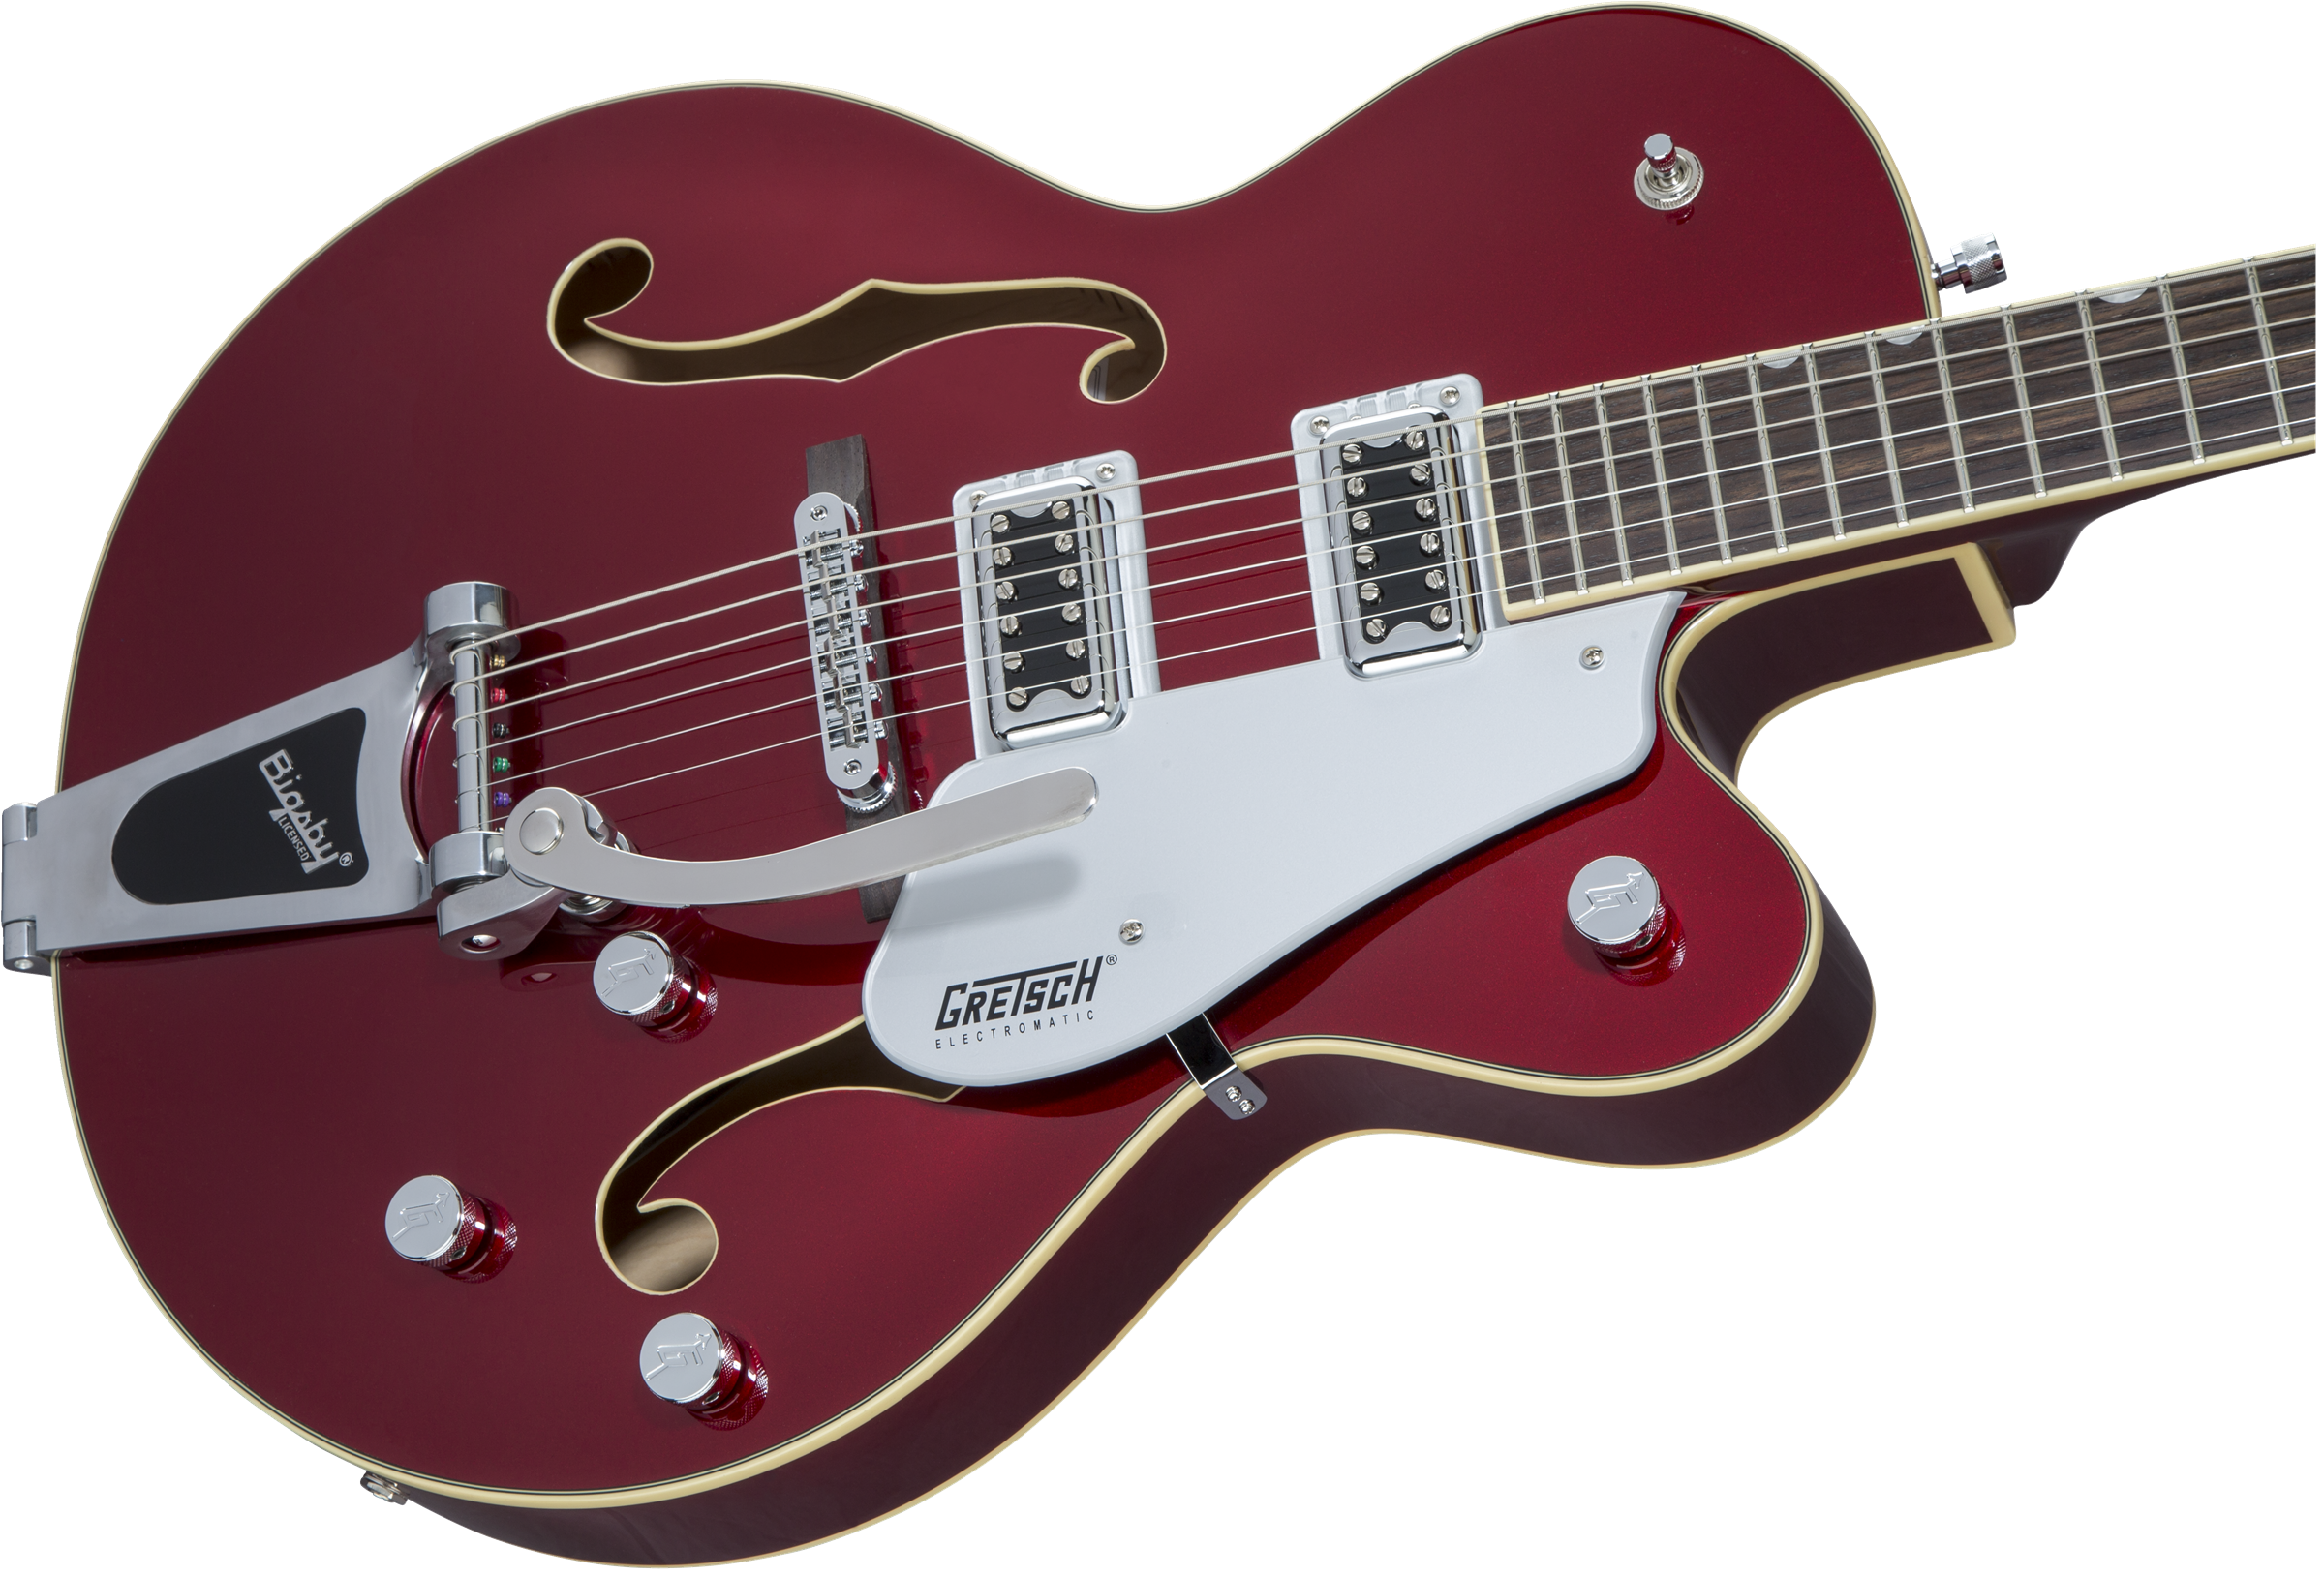 Gretsch G5420t Electromatic Hollow Body 2018 - Candy Apple Red - Semi-hollow electric guitar - Variation 3